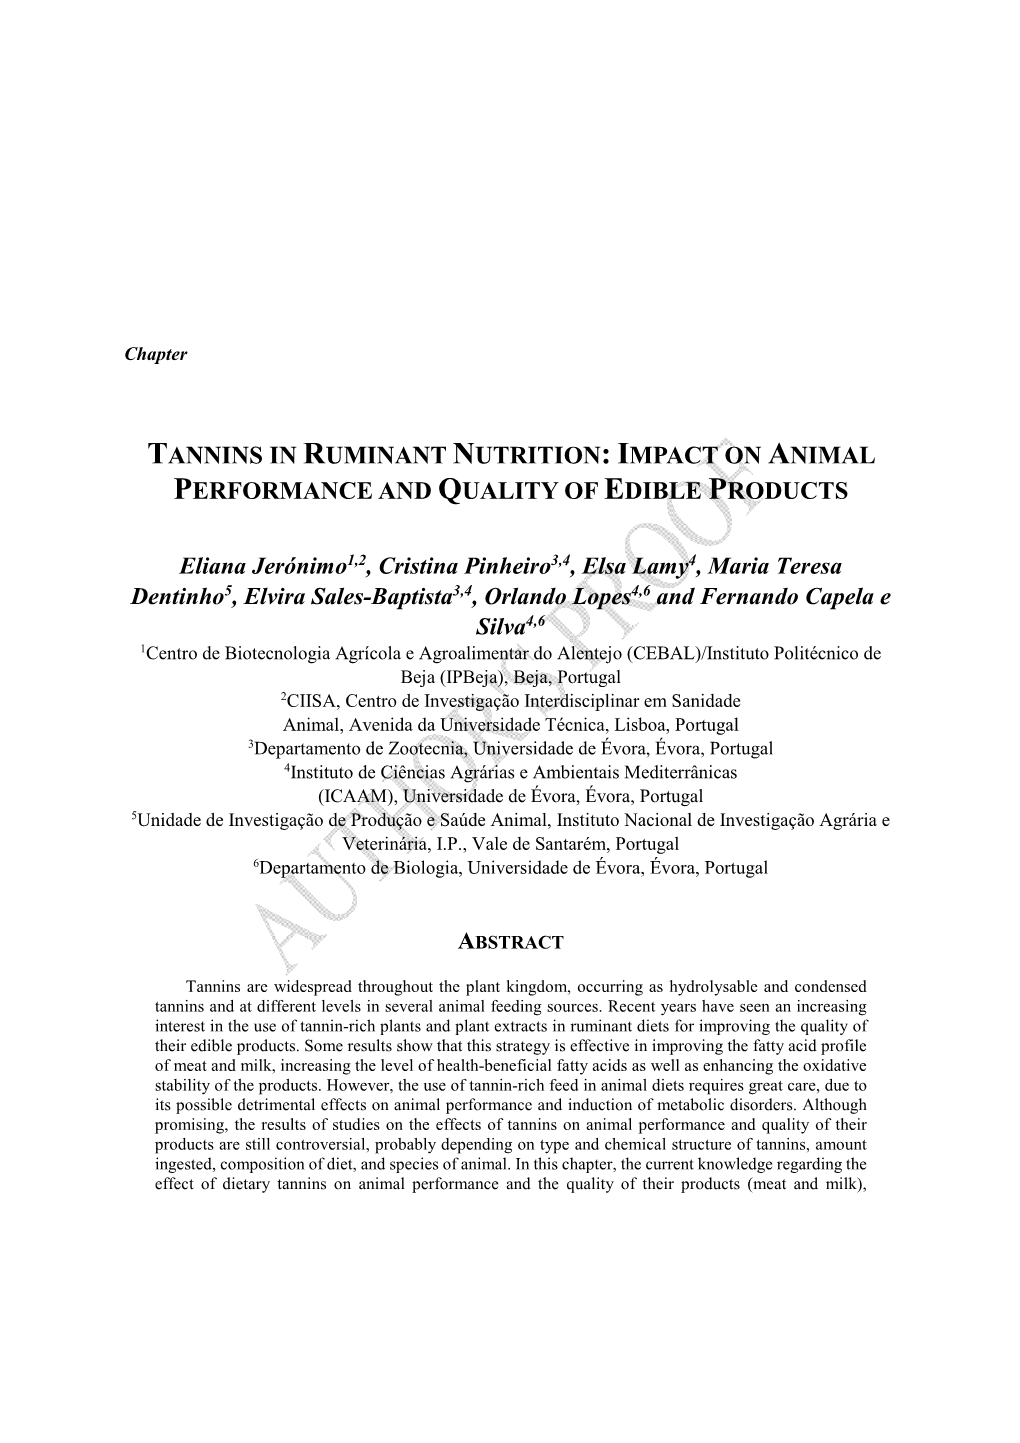 Tannins in Ruminant Nutrition: Impact on Animal Performance and Quality of Edible Products